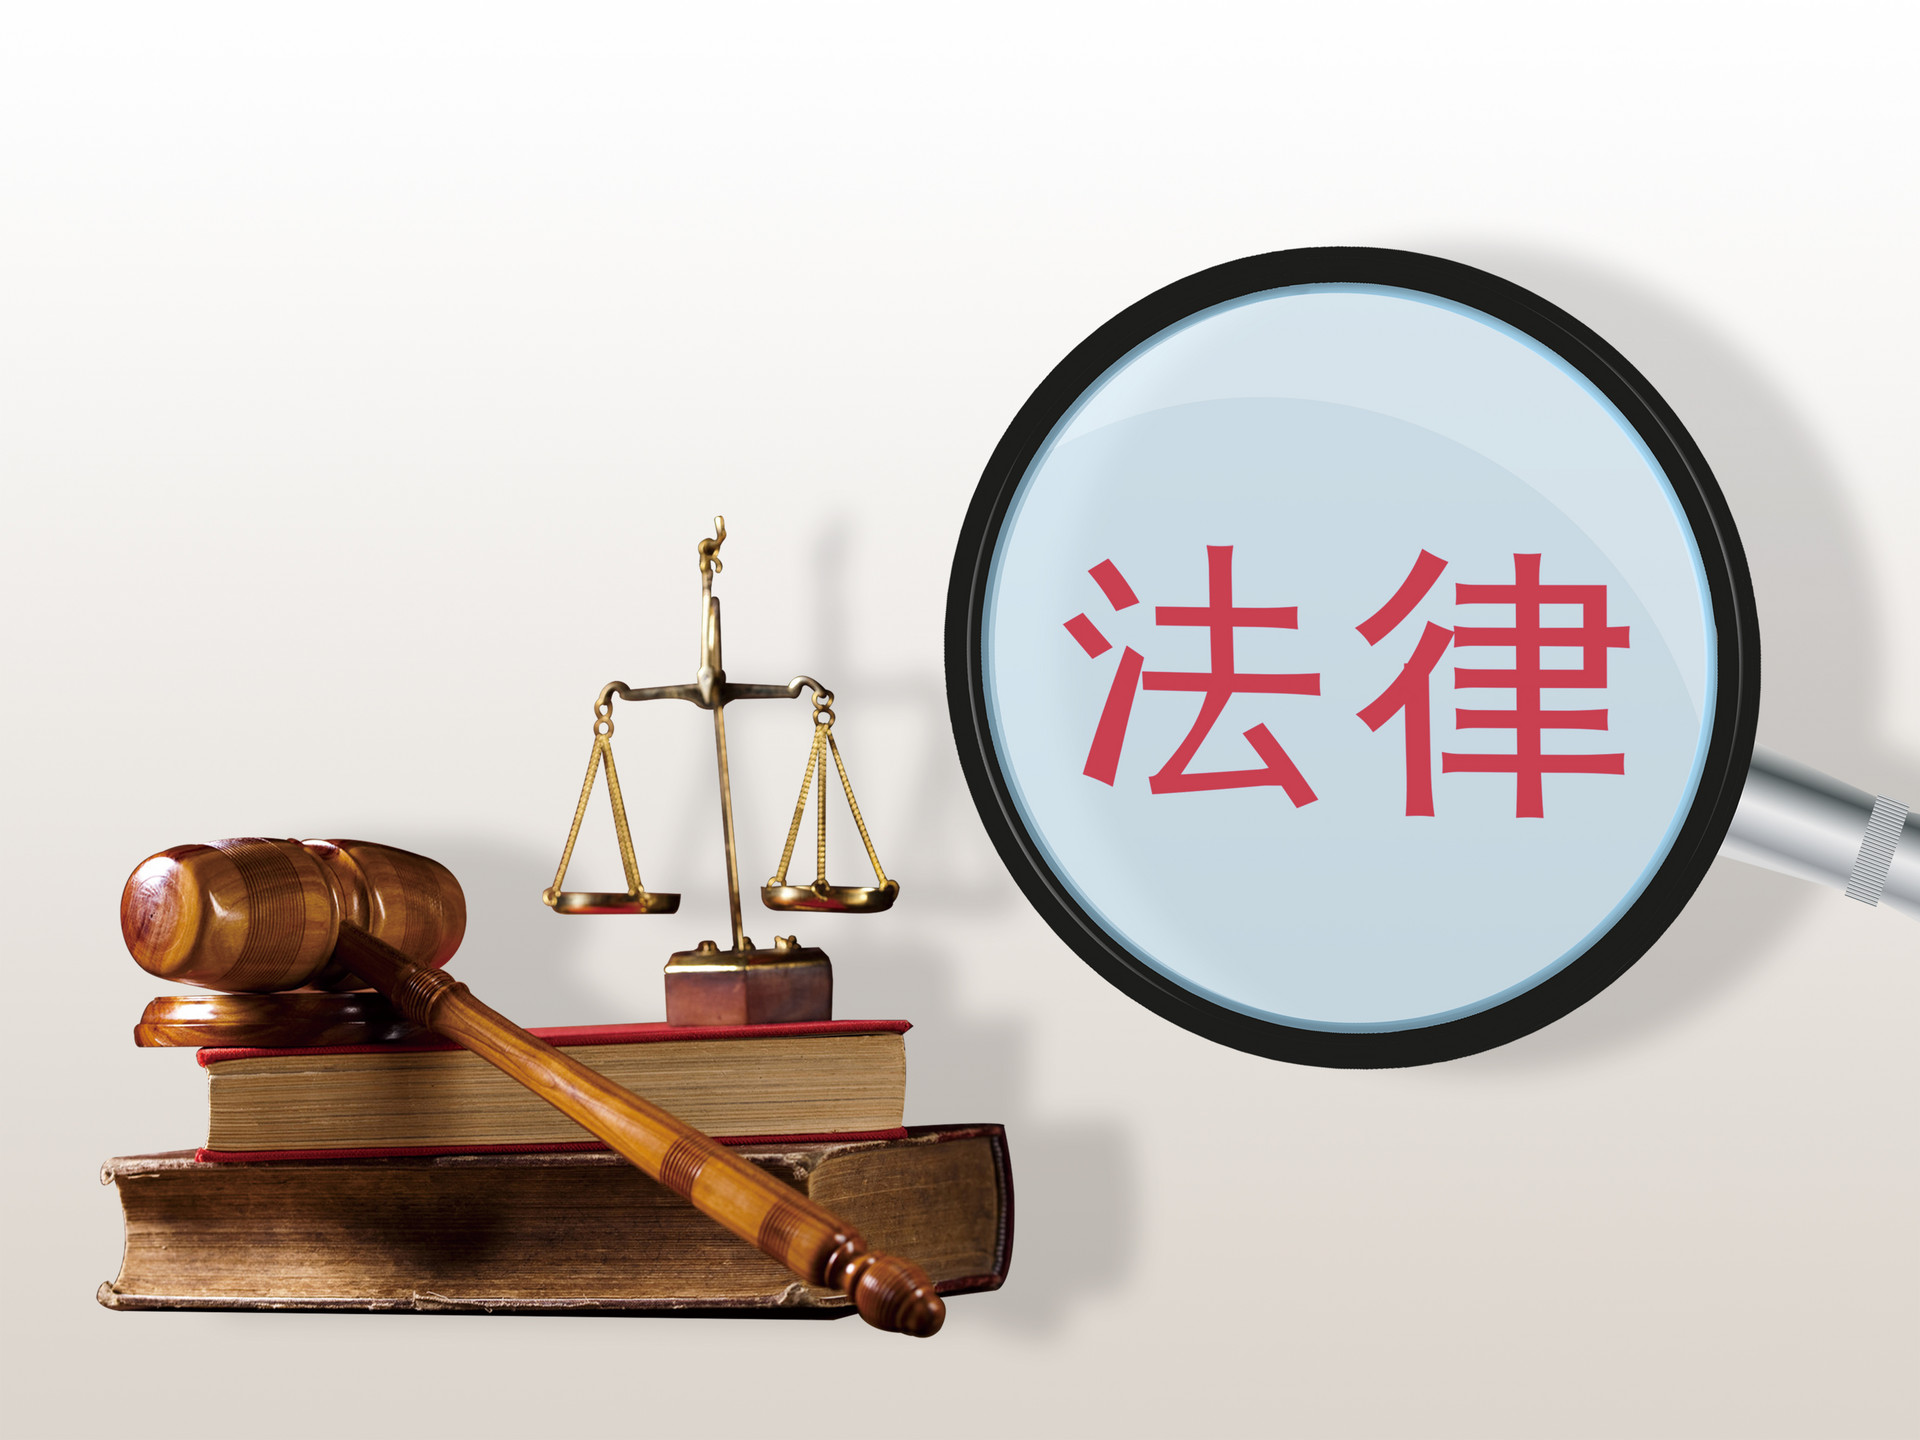 BIC case included in 2021 top 10 IPR cases heard by Beijing courts